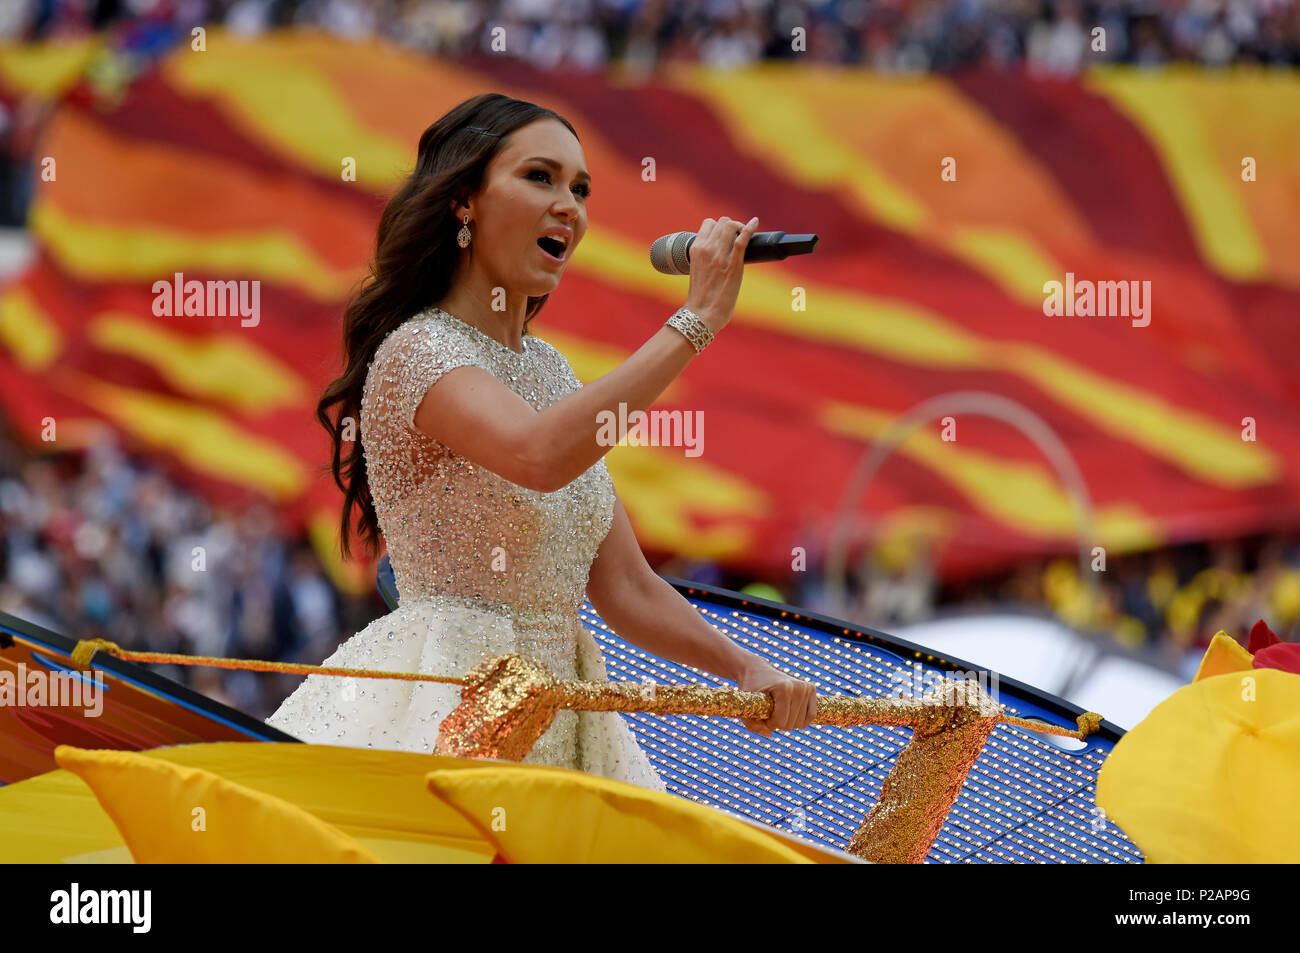 Moscow, Russia - June 14, 2018. Russian opera singer Aida Garifullina performing at the opening ceremony of FIFA World Cup 2018 in Russia. Credit: Alizada Studios/Alamy Live News Stock Photo